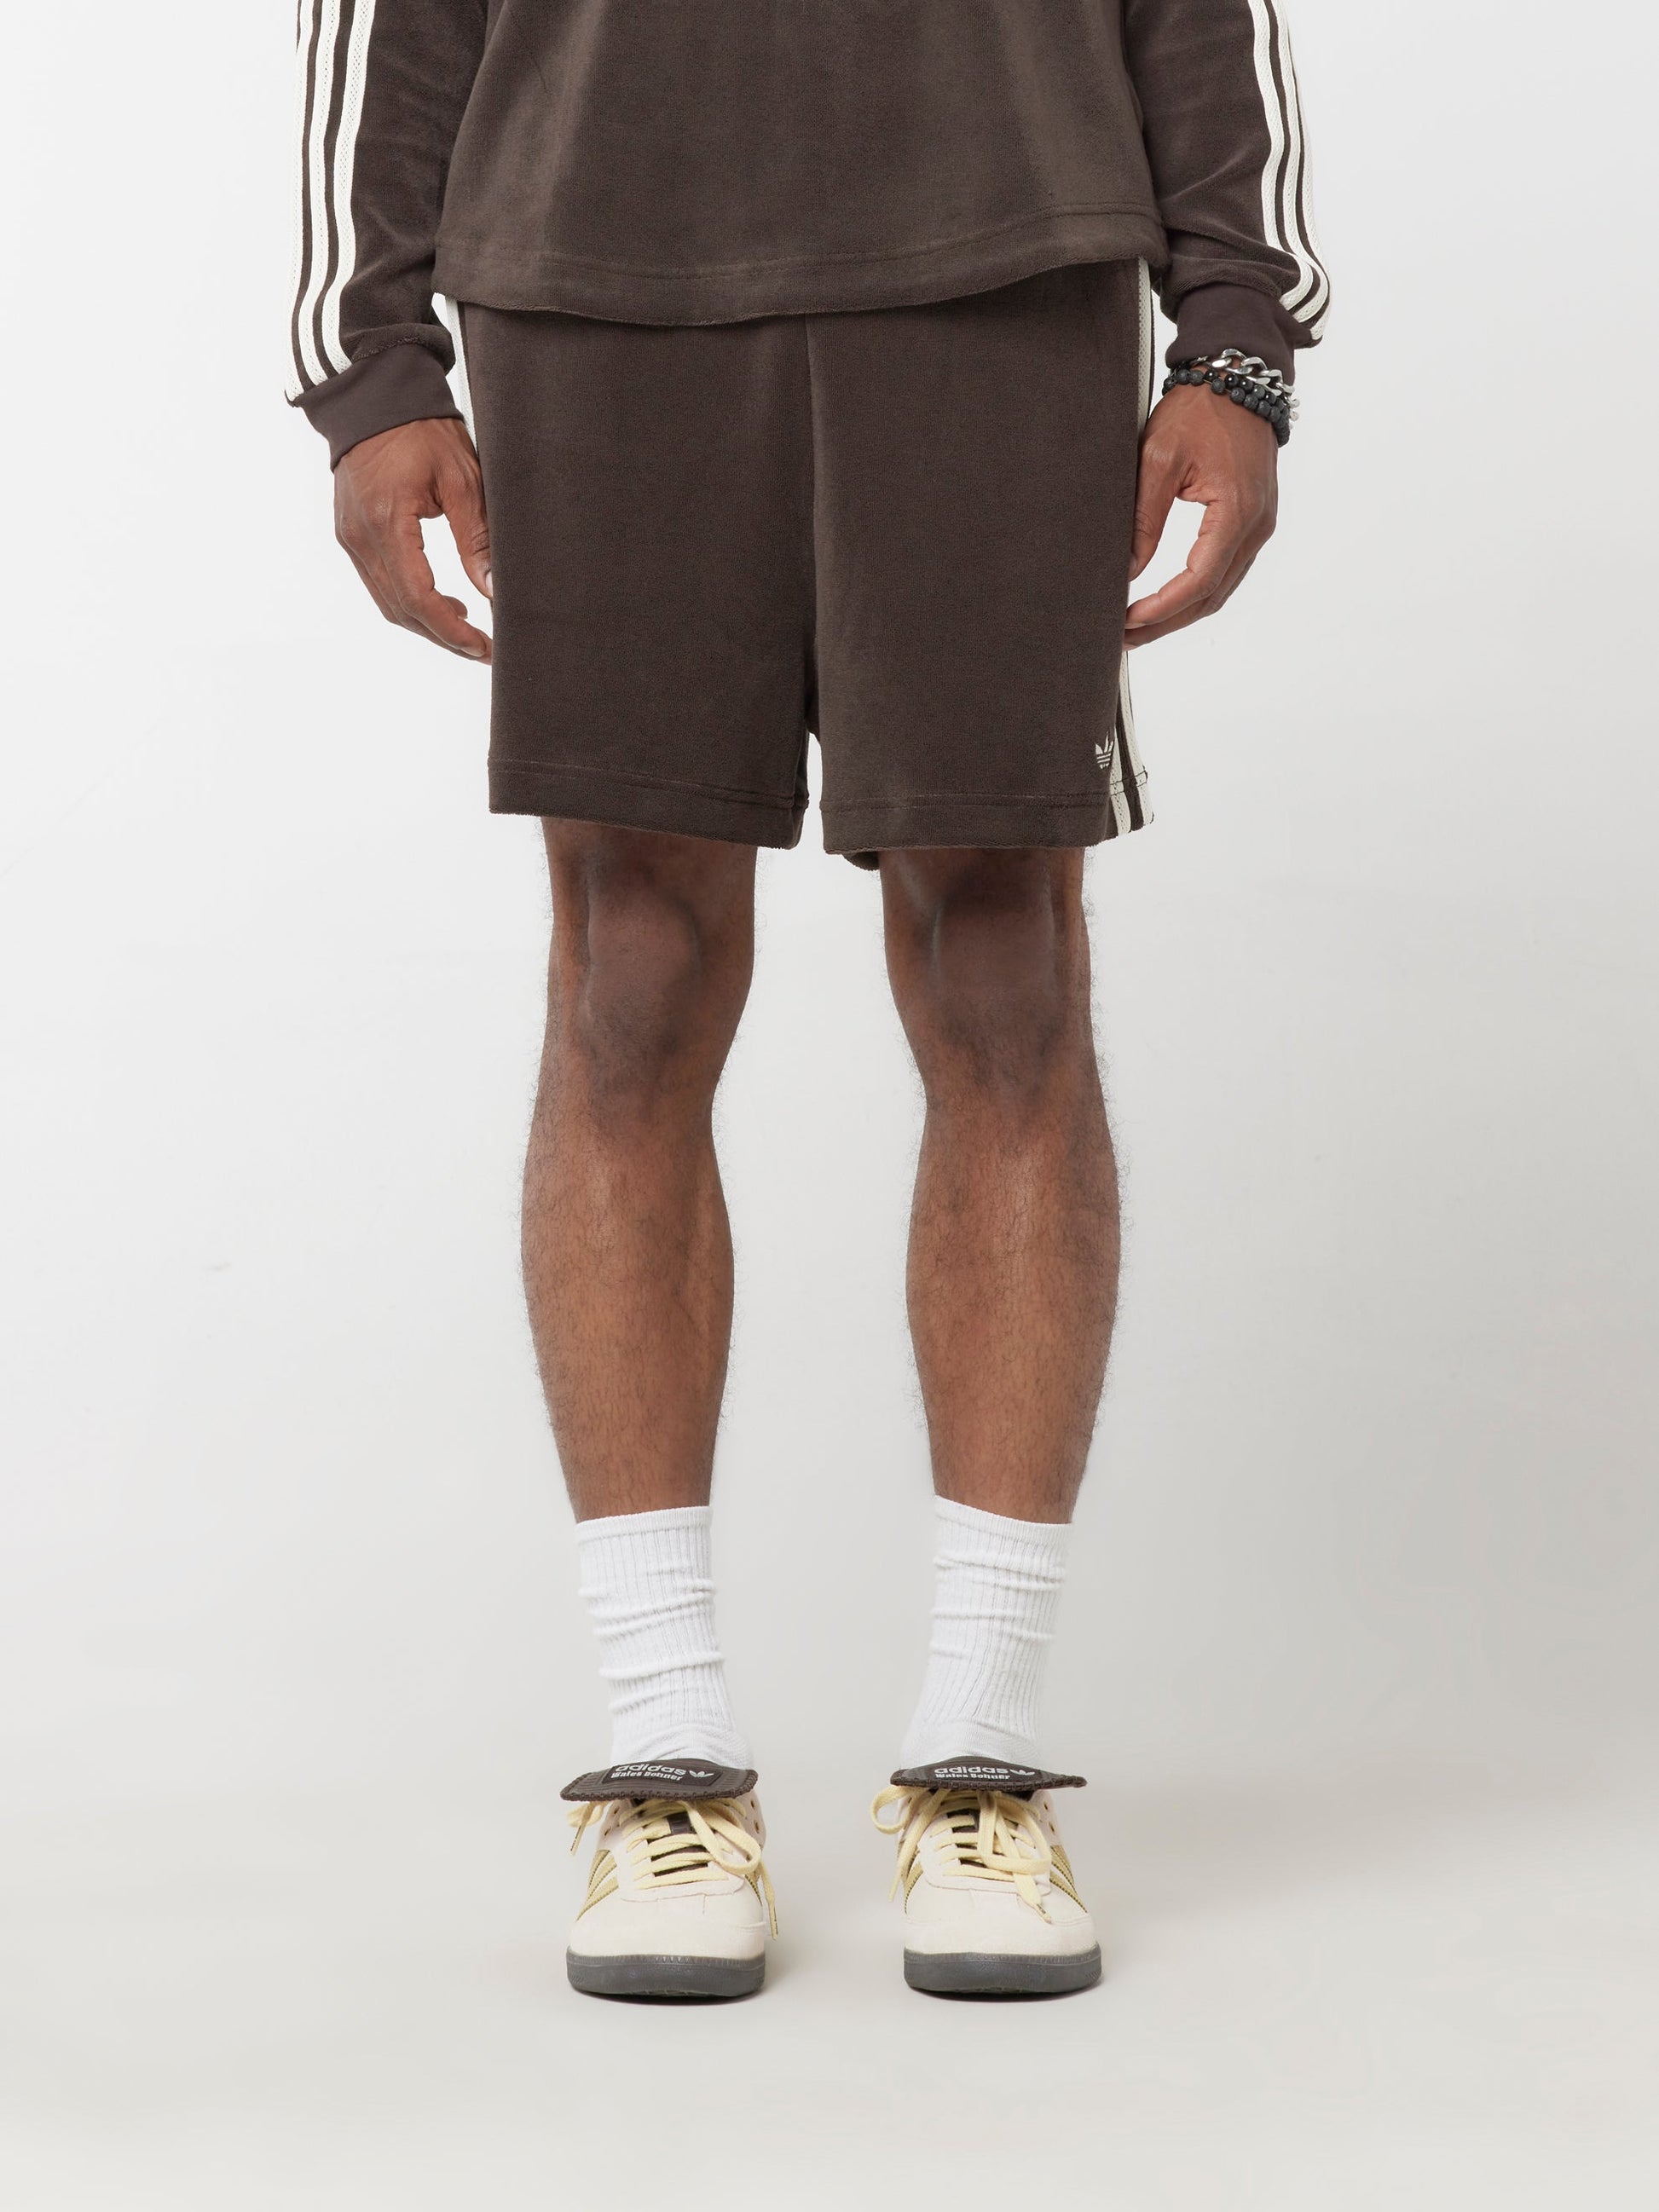 ADIDAS ORIGINALS + Wales Bonner crochet-trimmed recycled-shell shorts